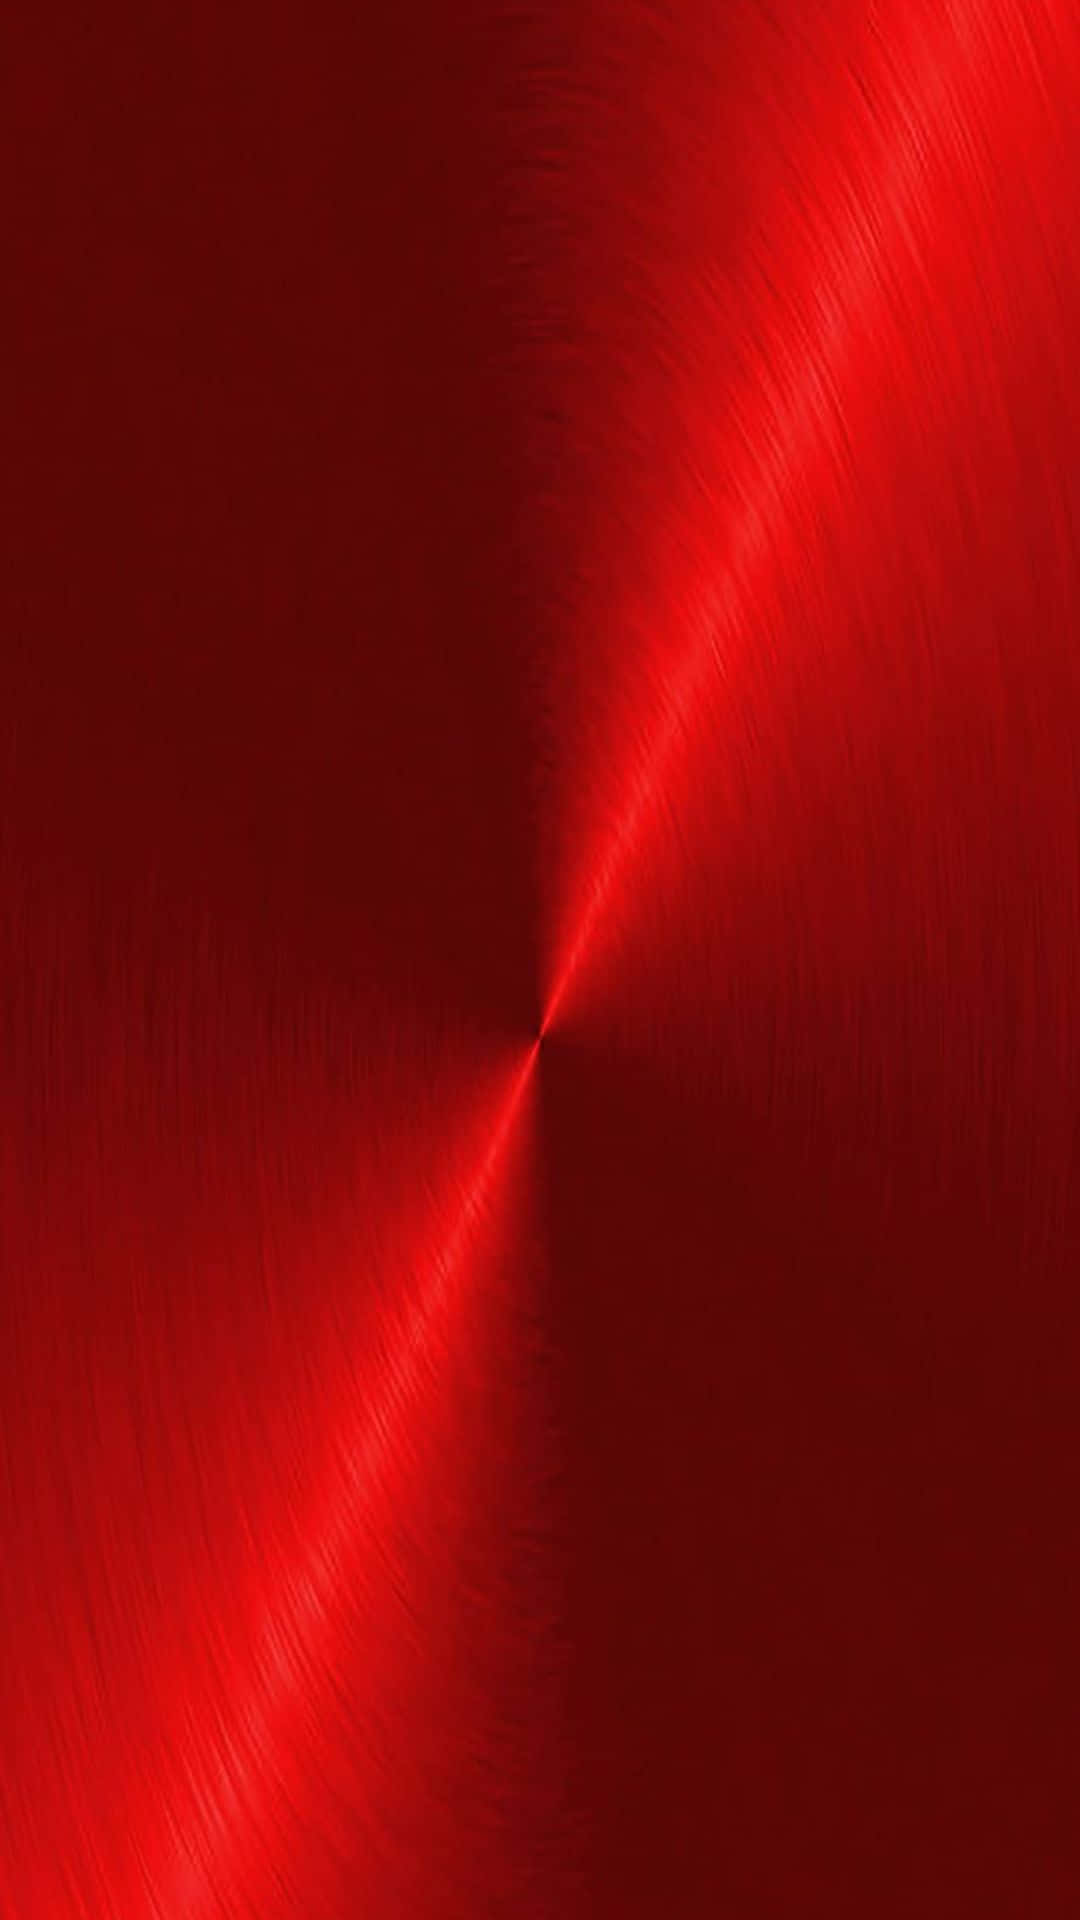 A Bright, Vibrant Solid Red Wallpaper